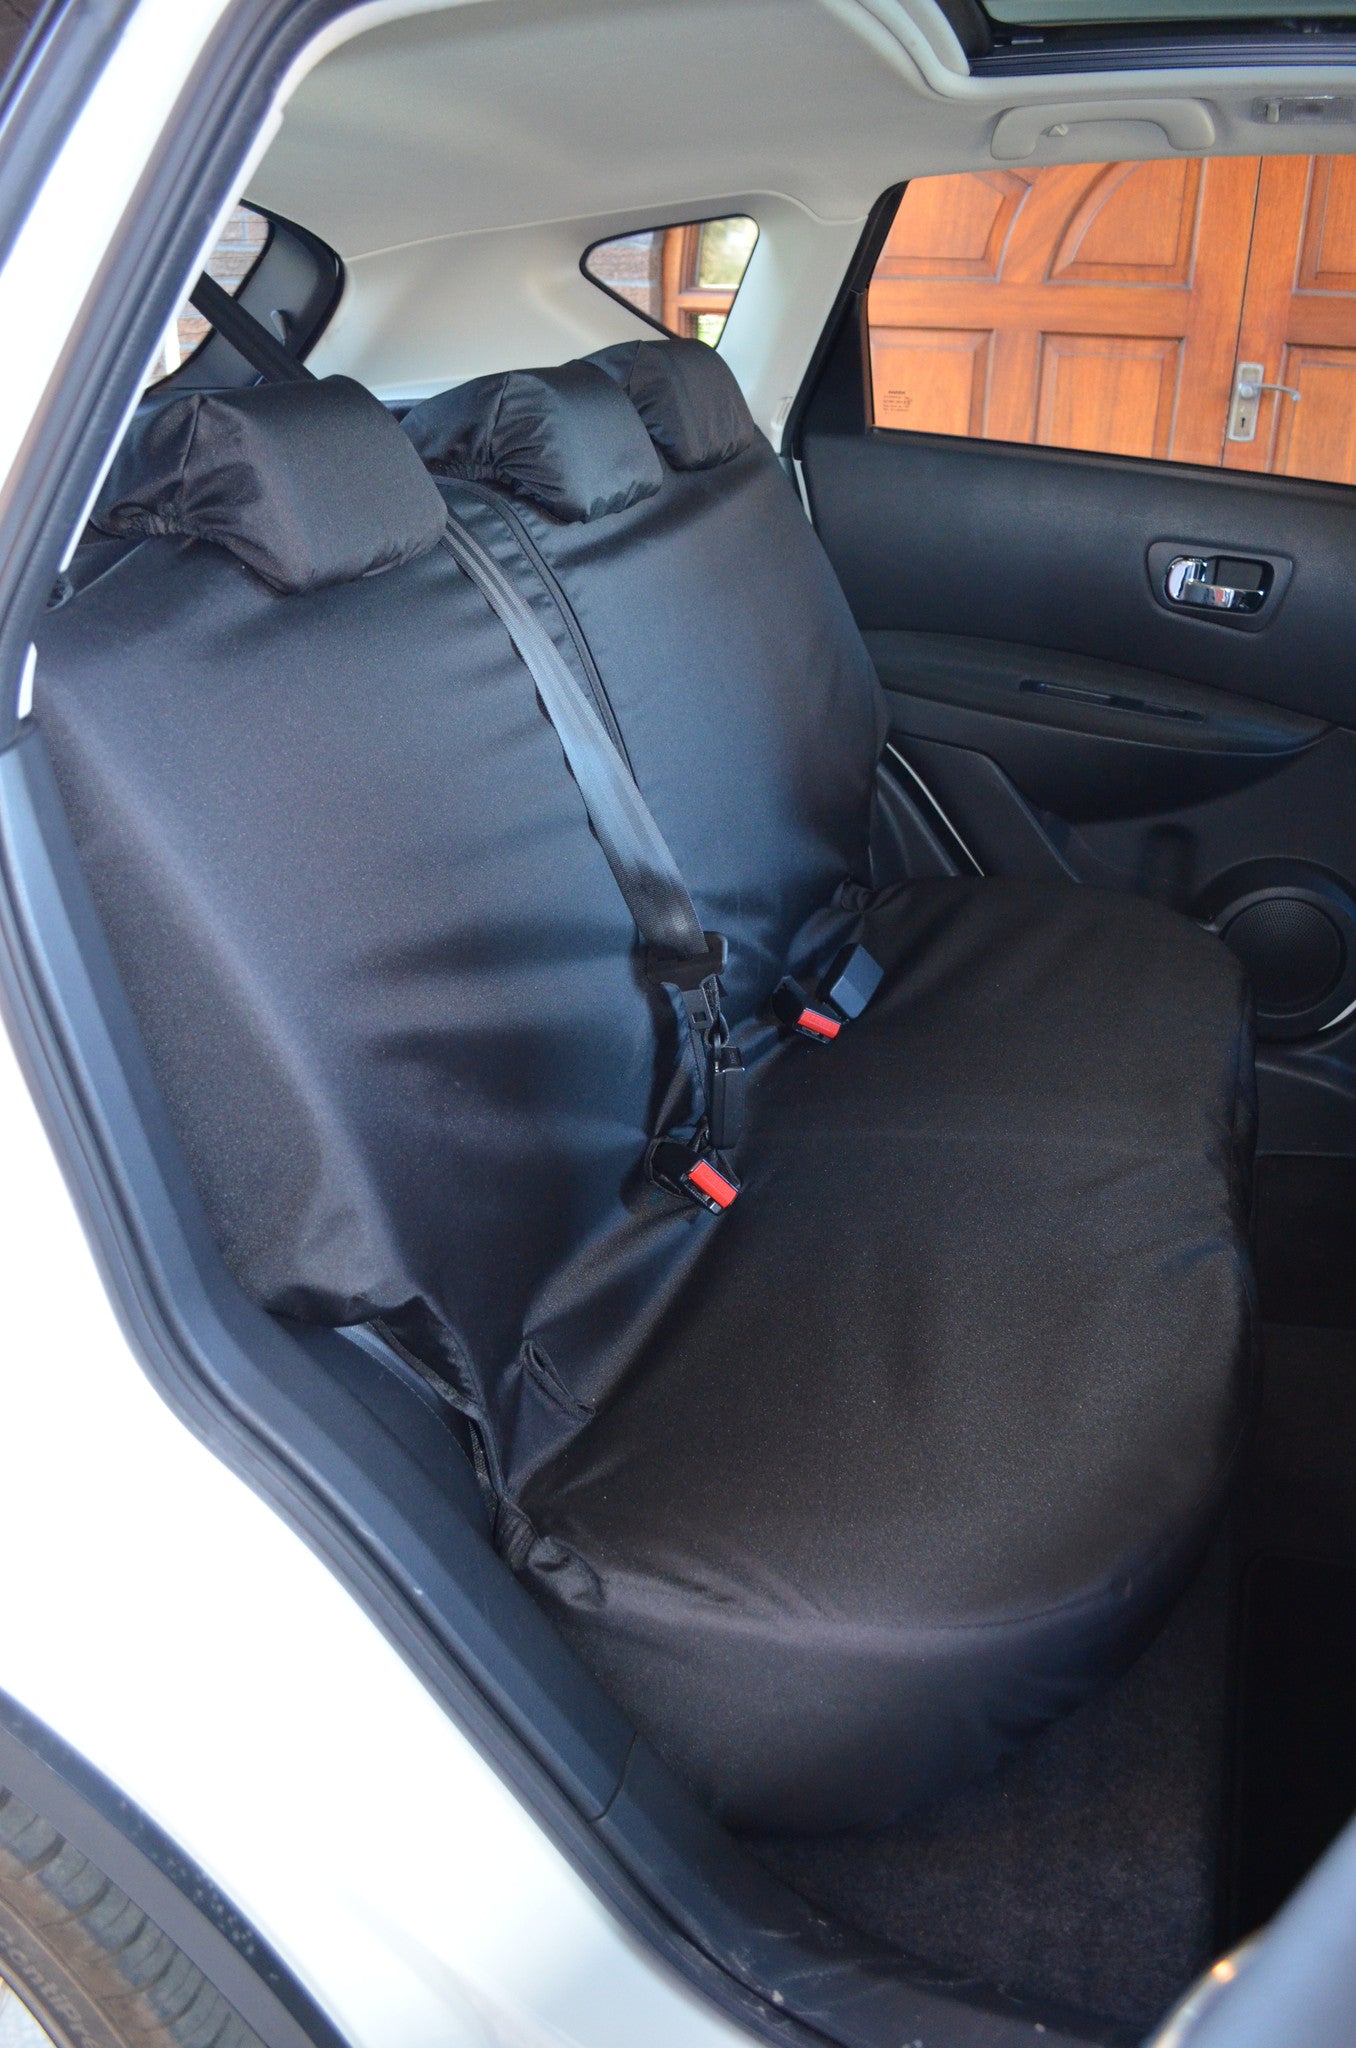 Nissan Qashqai 2007 - 2013 Tailored Seat Covers Black / Rear Turtle Covers Ltd